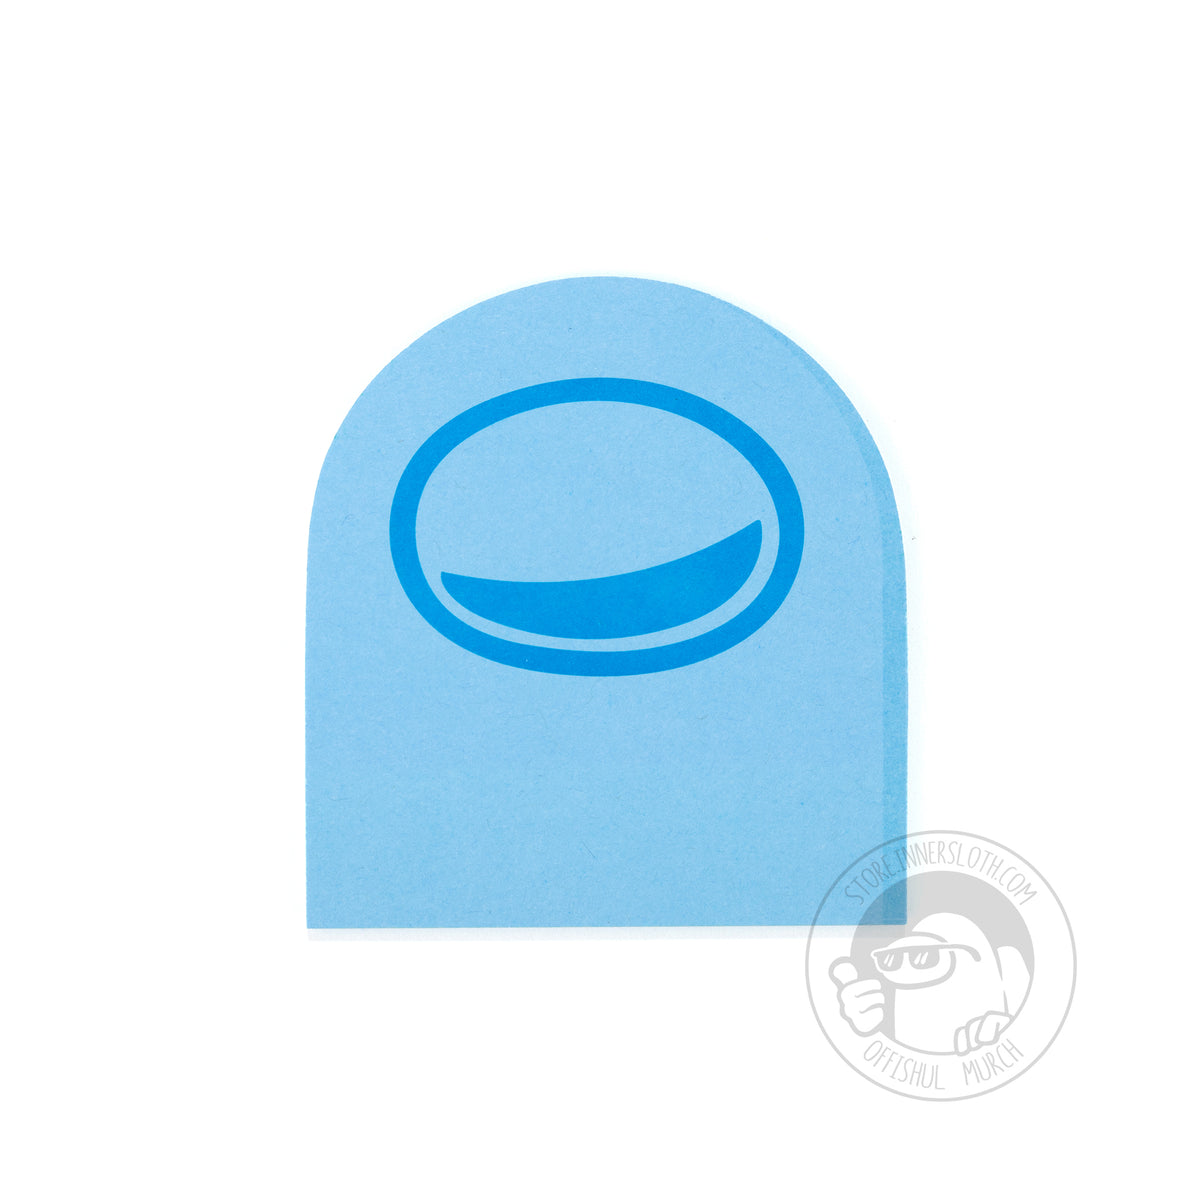 A product photo of the blue pack of Crewmate Post-It Notes.